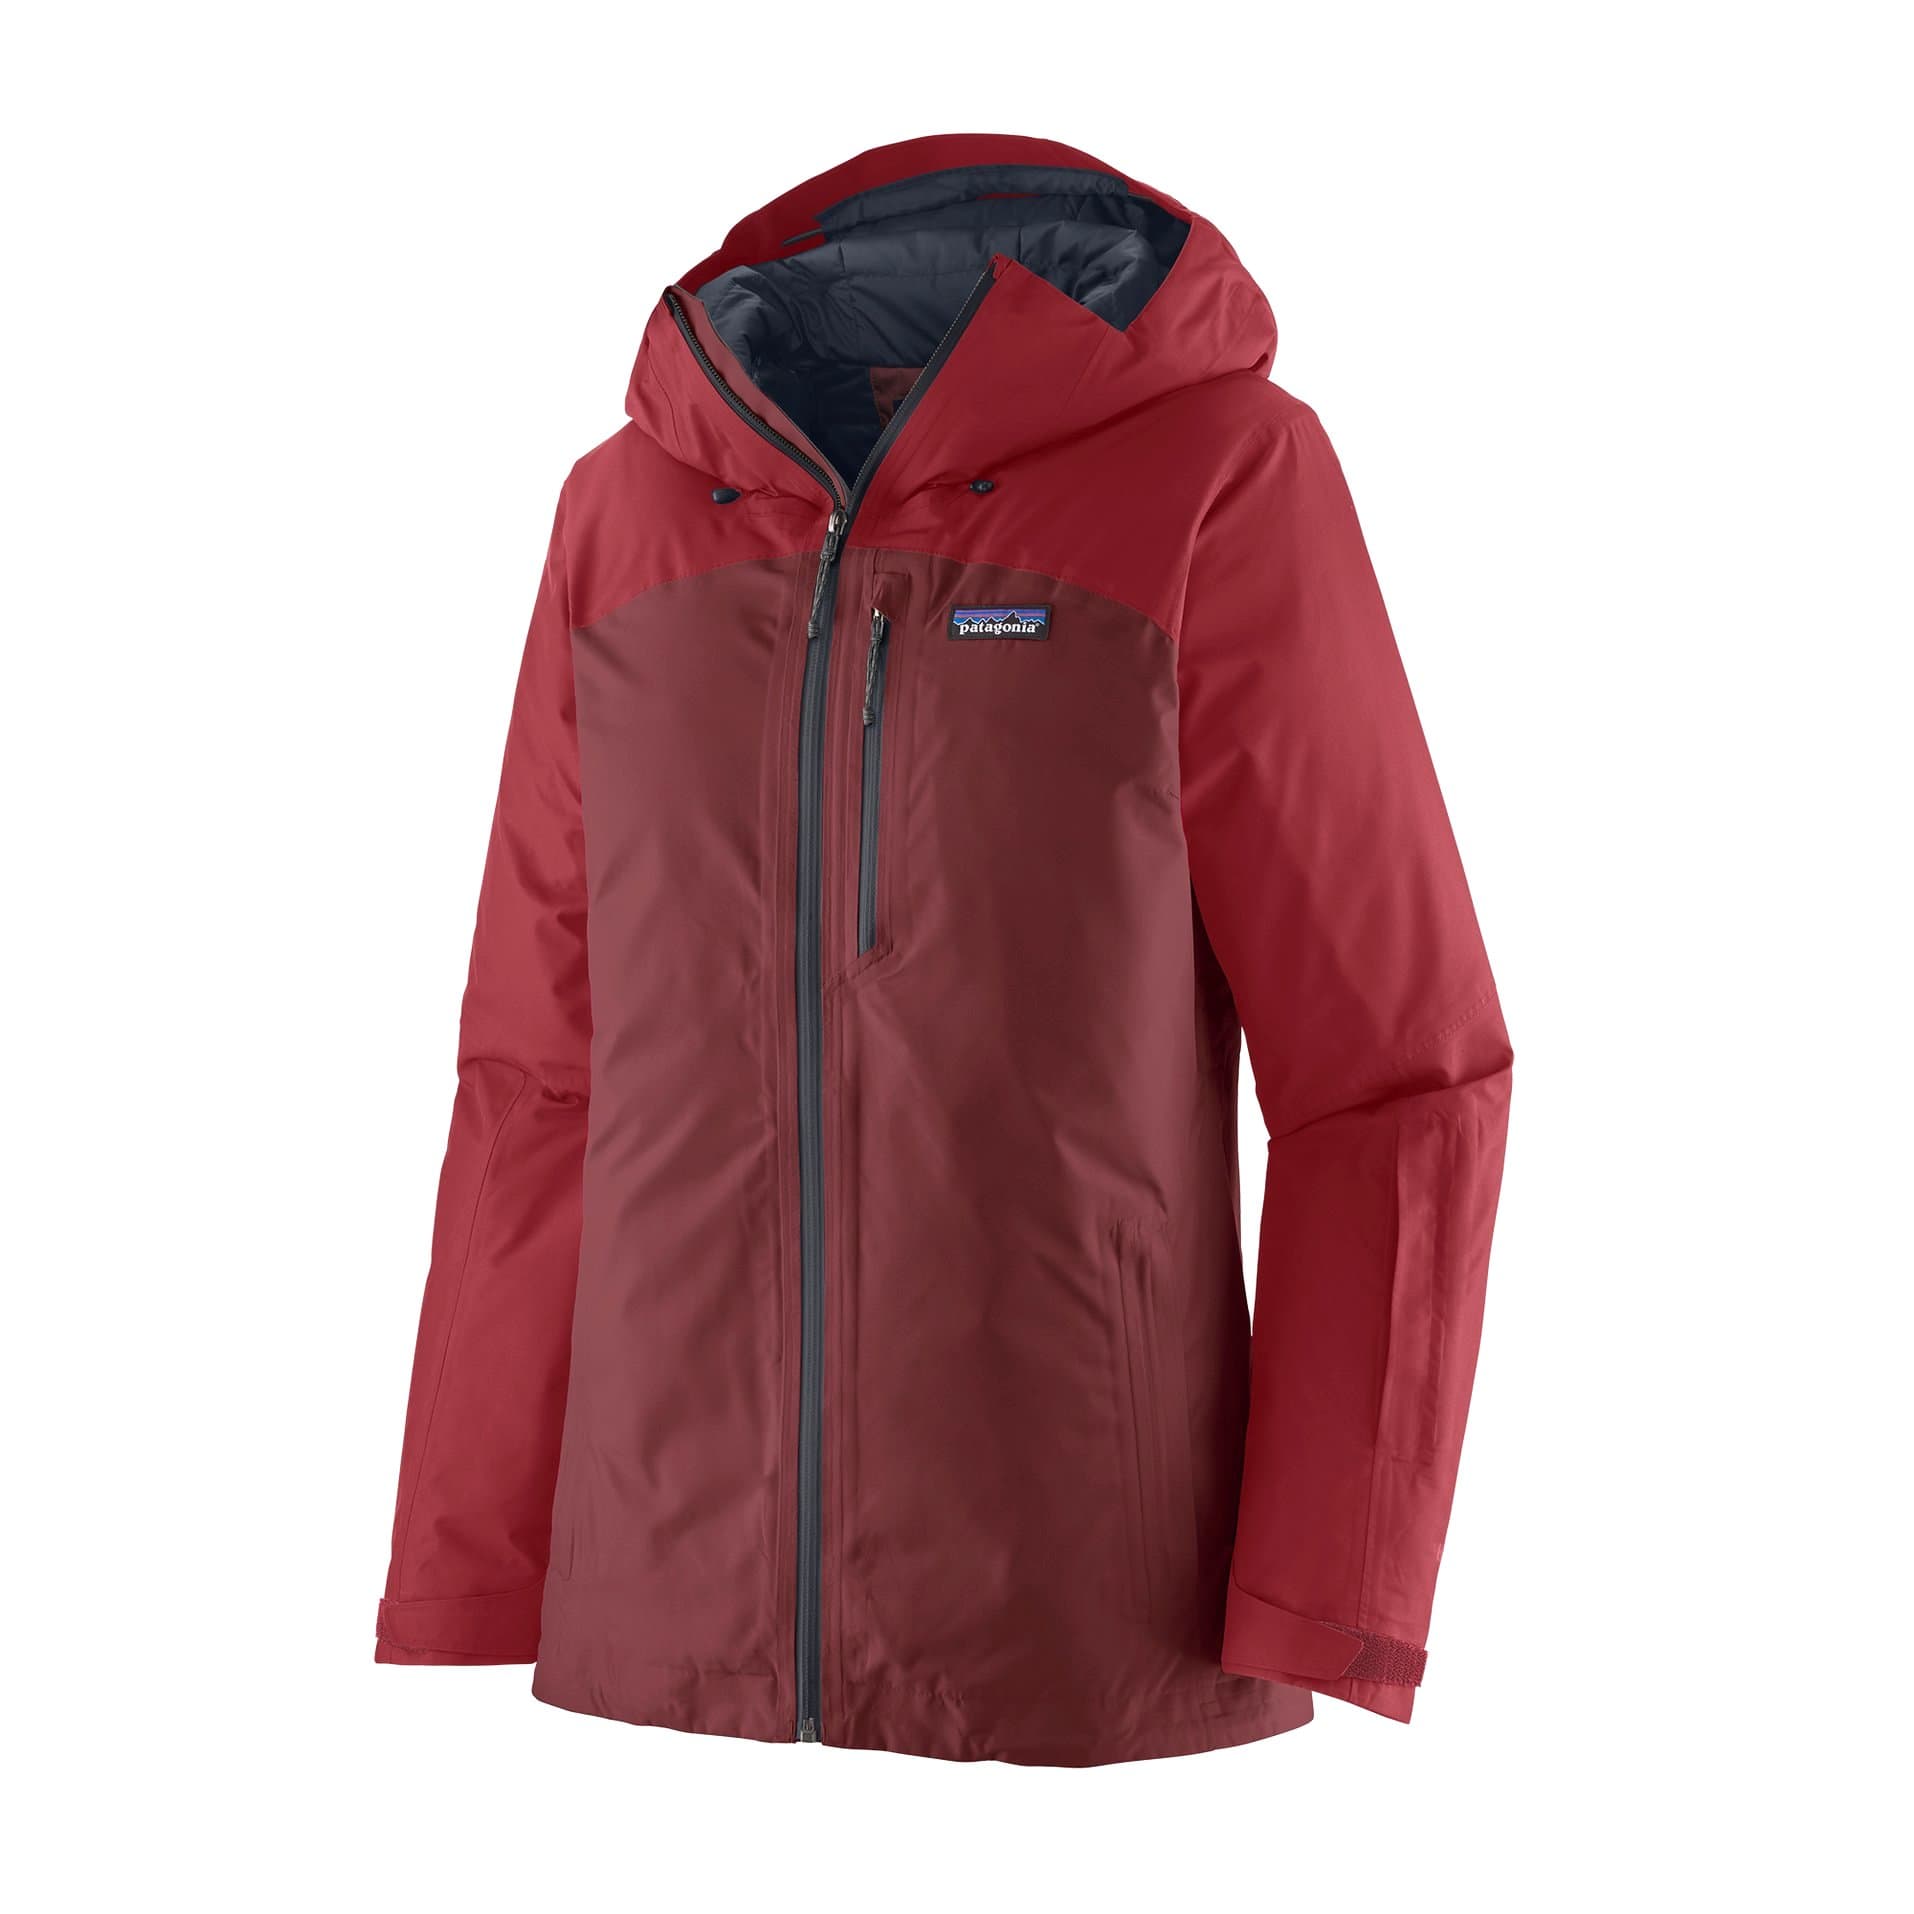 PATAGONIA POWDER TOWN INSULATED JACKET giacca donna